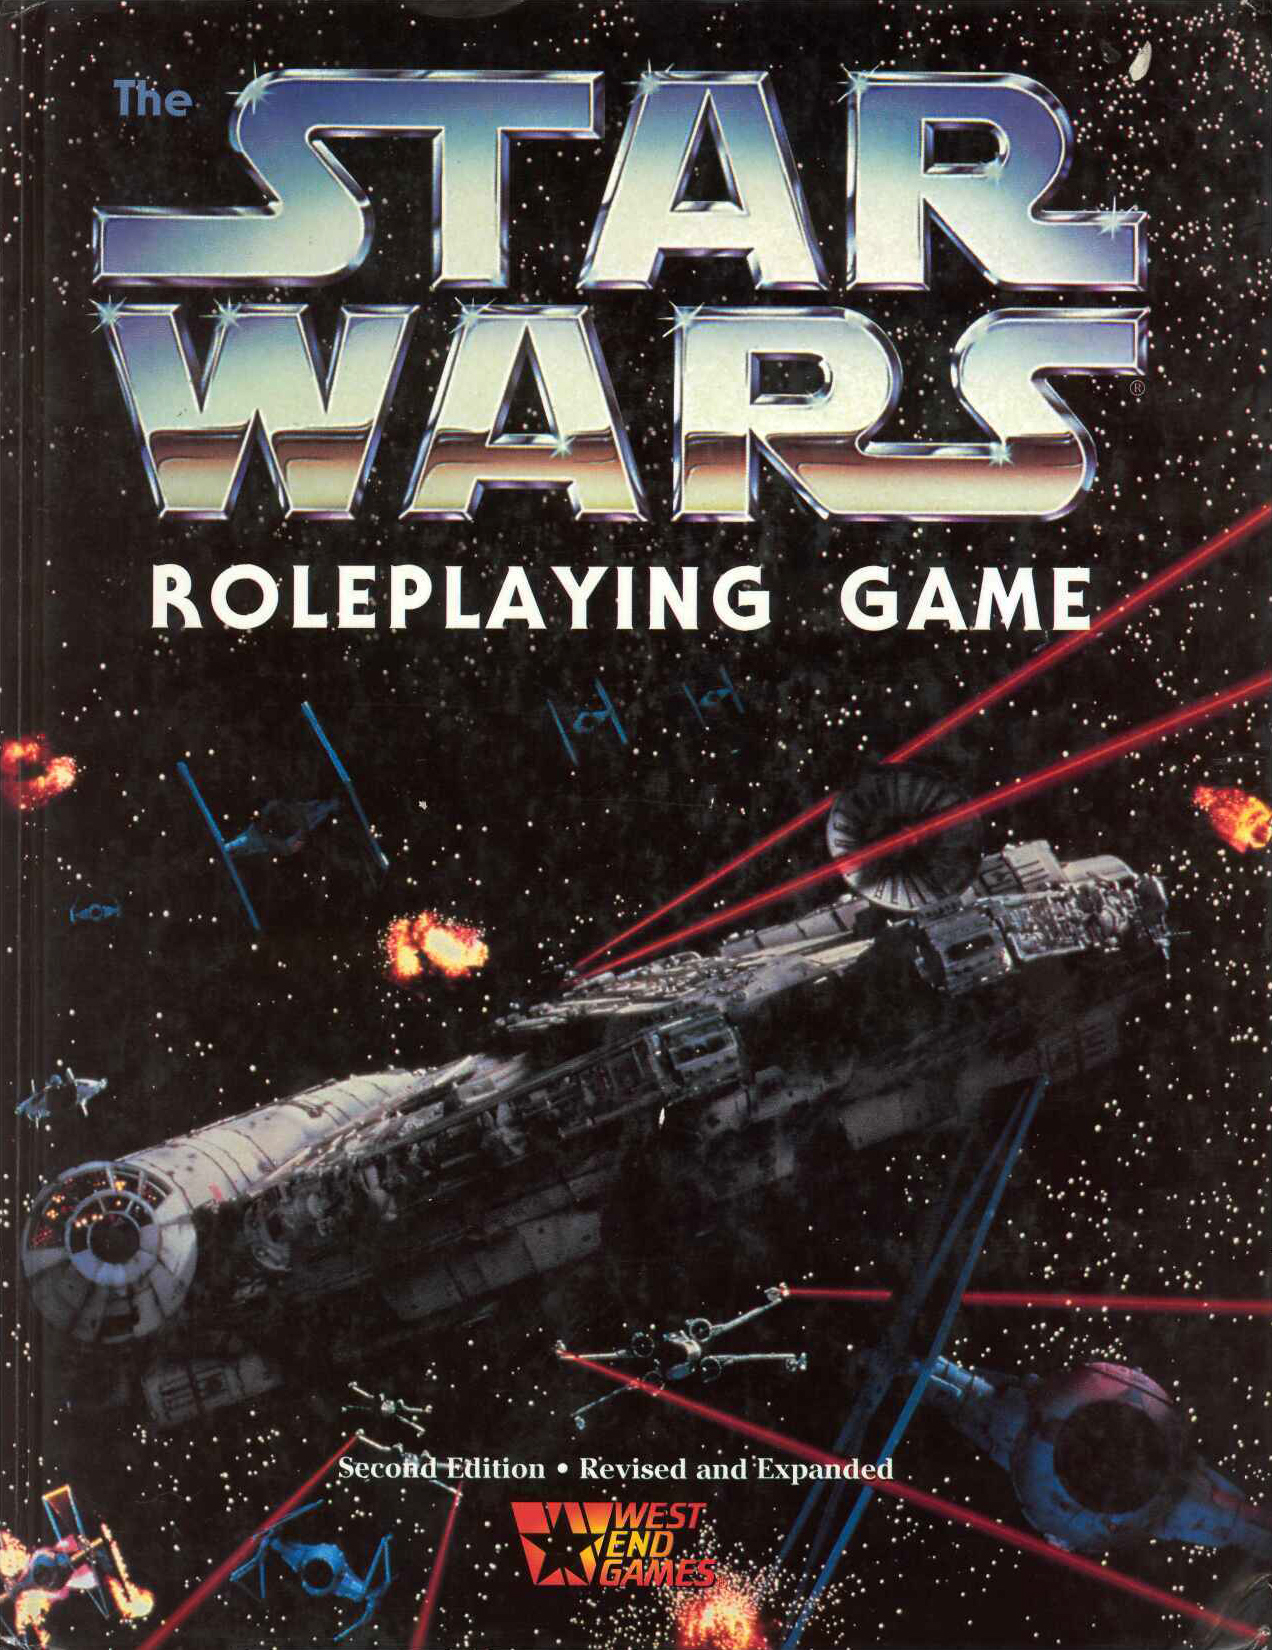 Battle for Golden Sun-Star Wars RPG Role Playing Game Adventure-West End 40017 